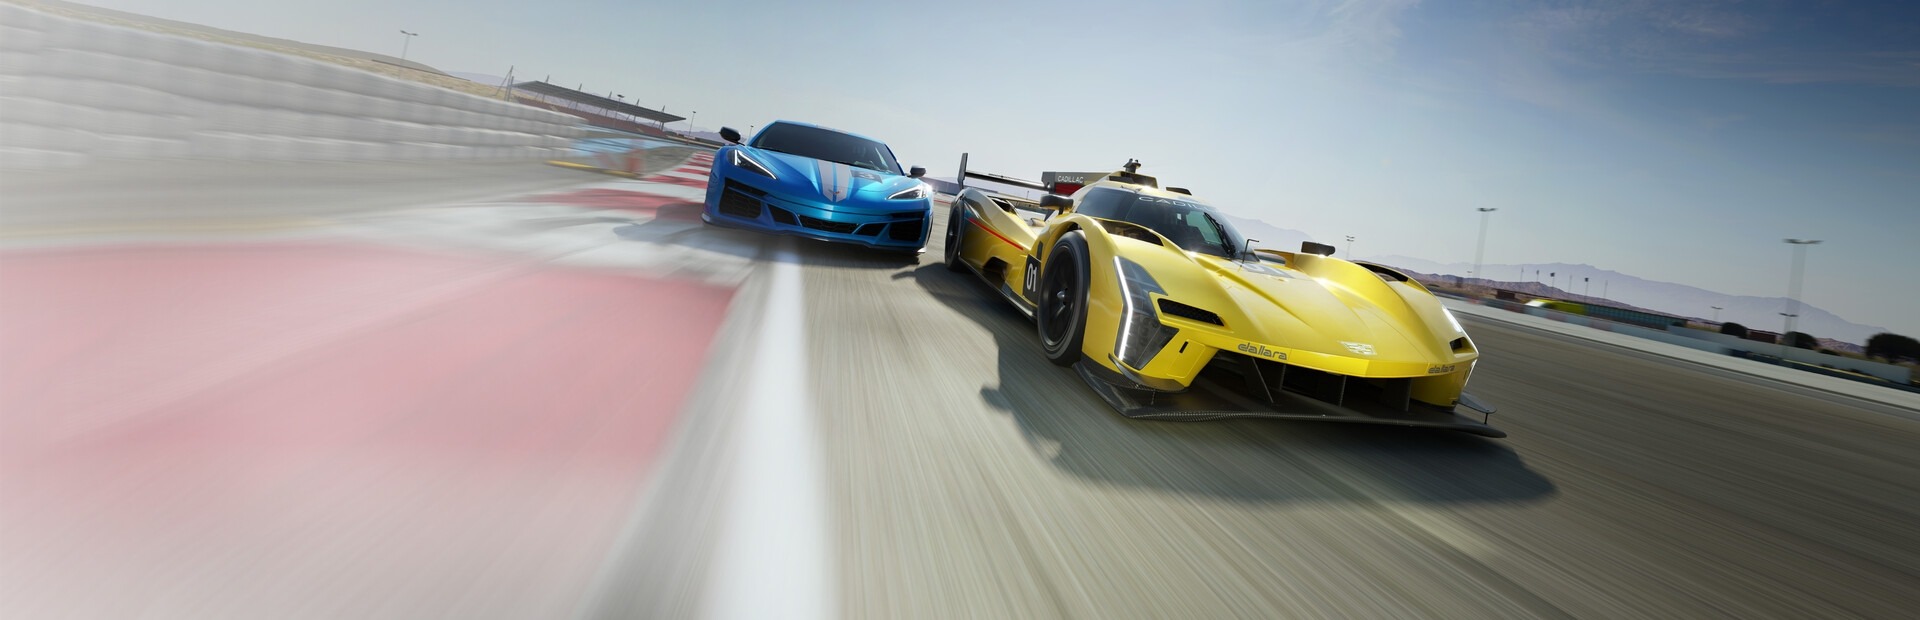 Forza Motorsport pre-orders now available for Steam, PC specs